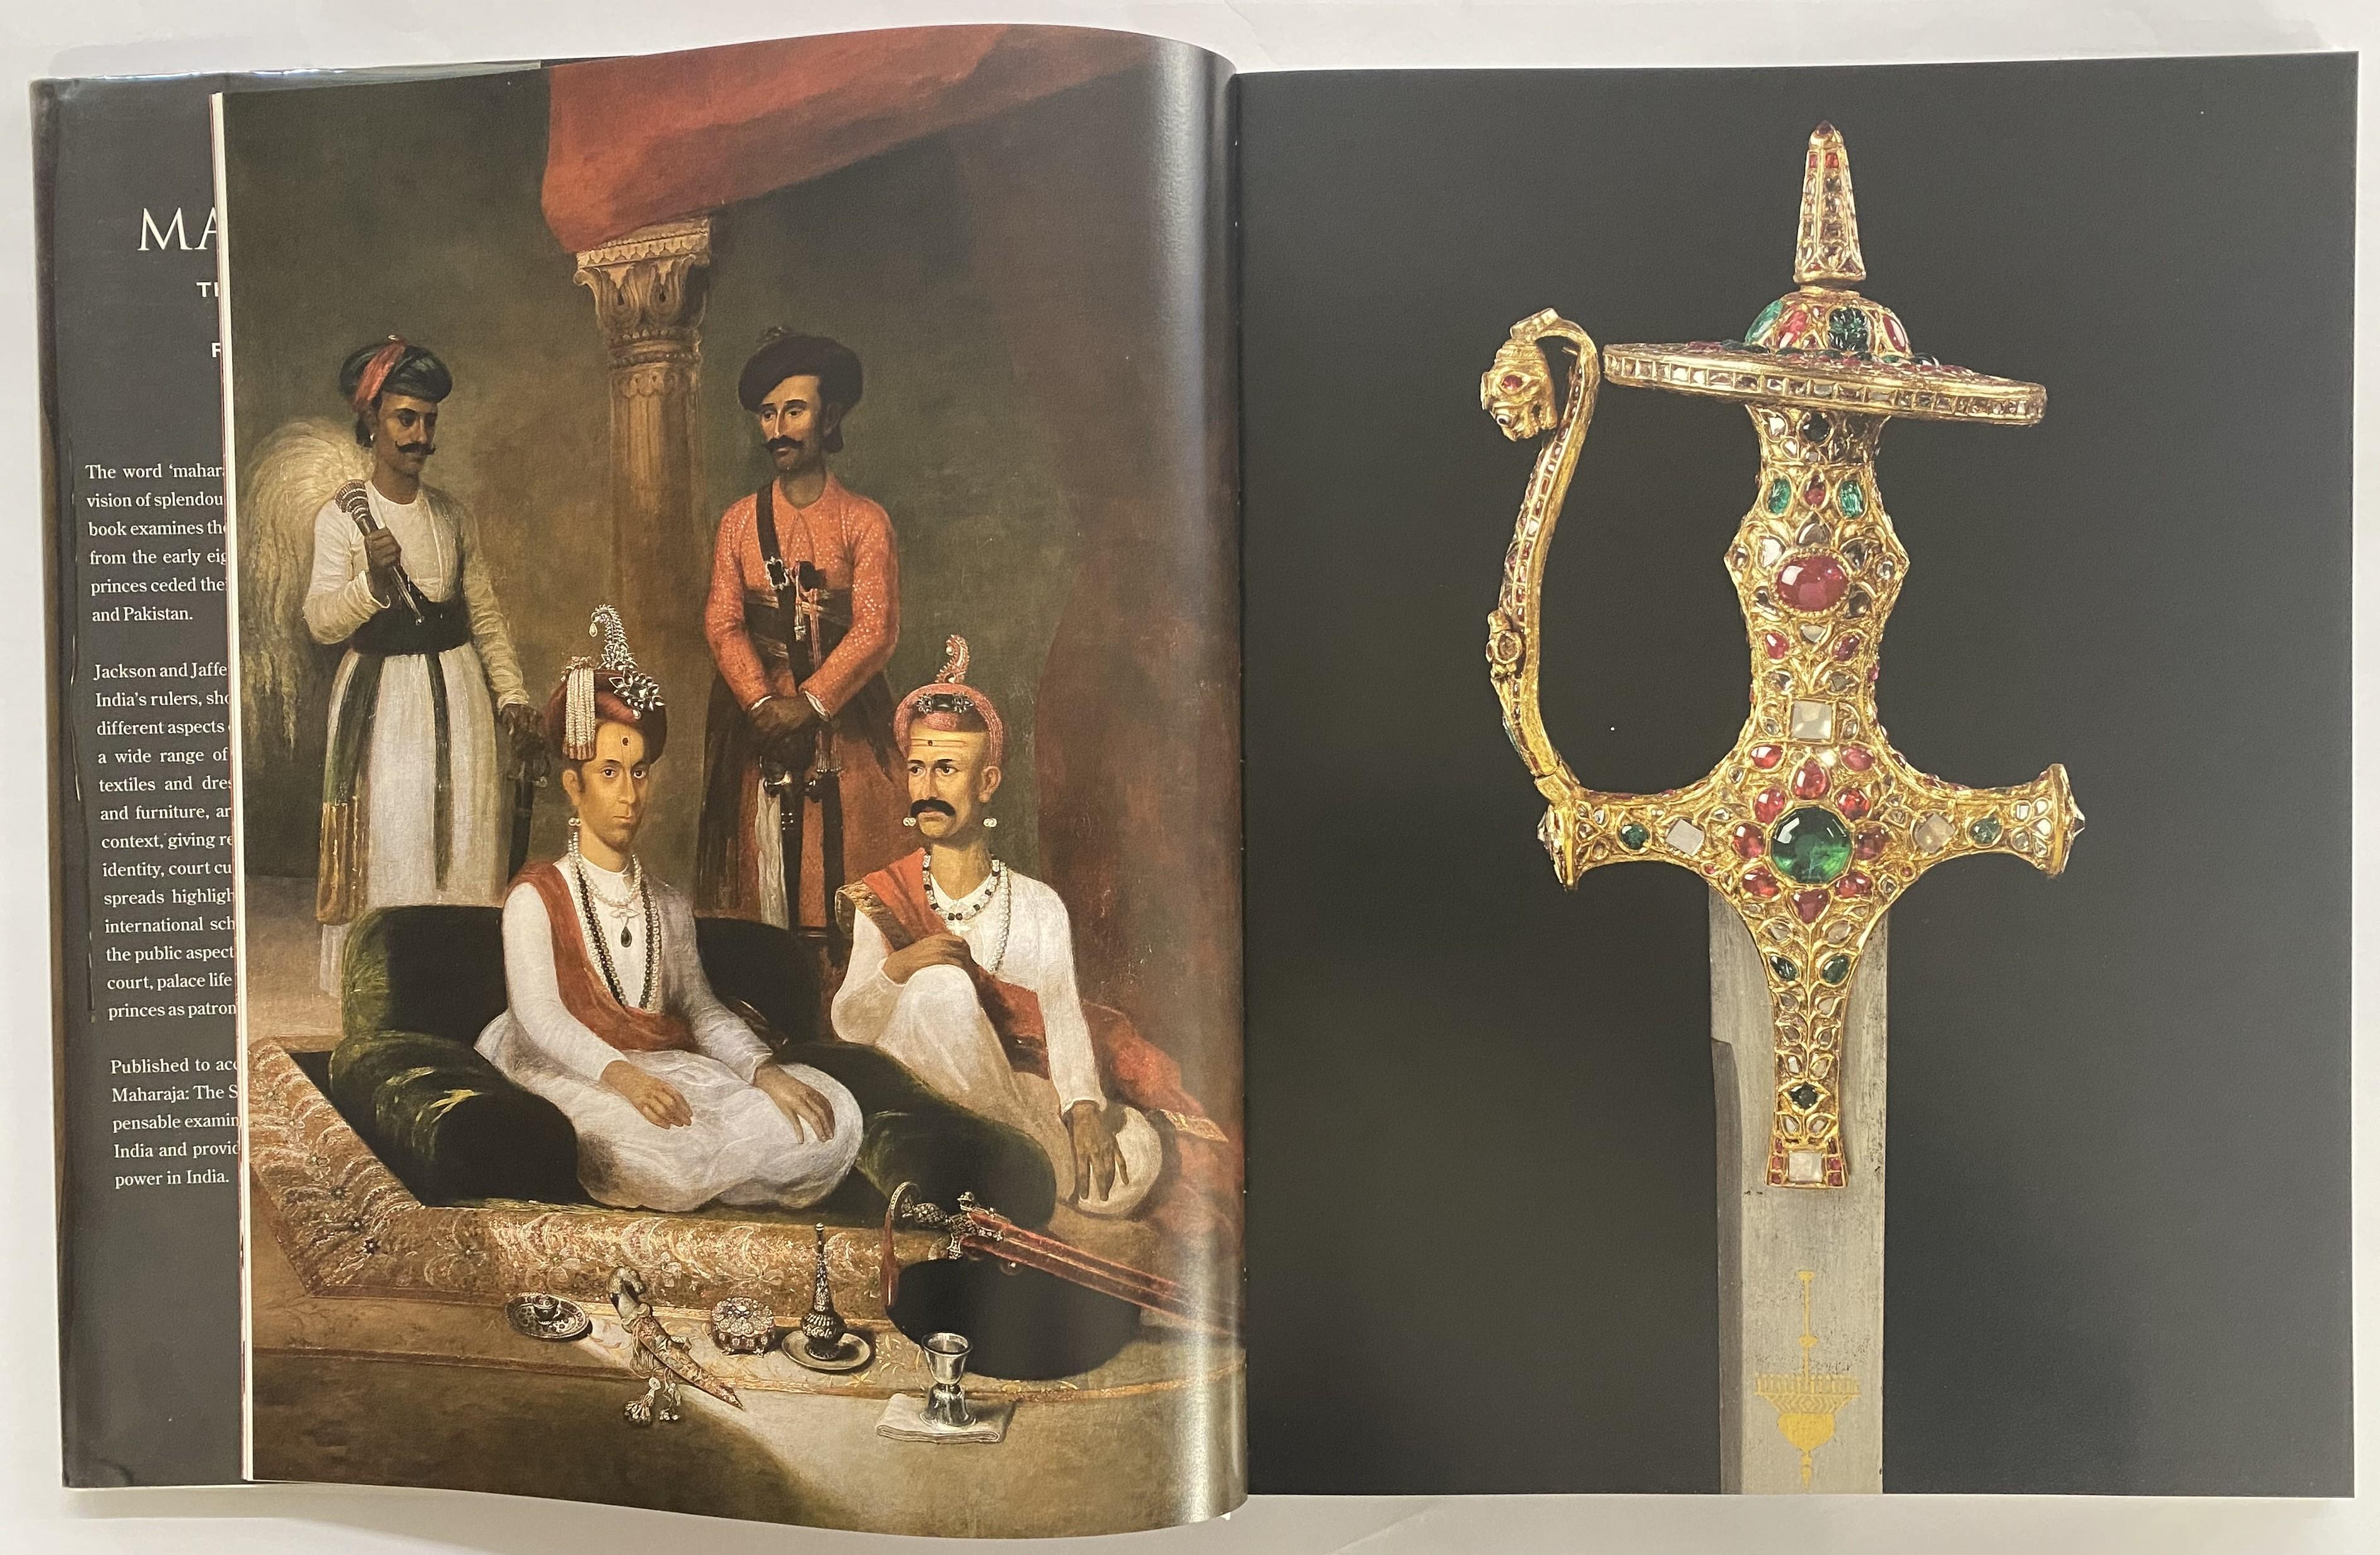 Edited by Anna Jackson and Amin Jaffer
The word 'maharaja' - literally 'great king' - conjures up a vision of splendour and magnificence. This lavishly illustrated book examines the real and perceived worlds of the maharaja, from the early